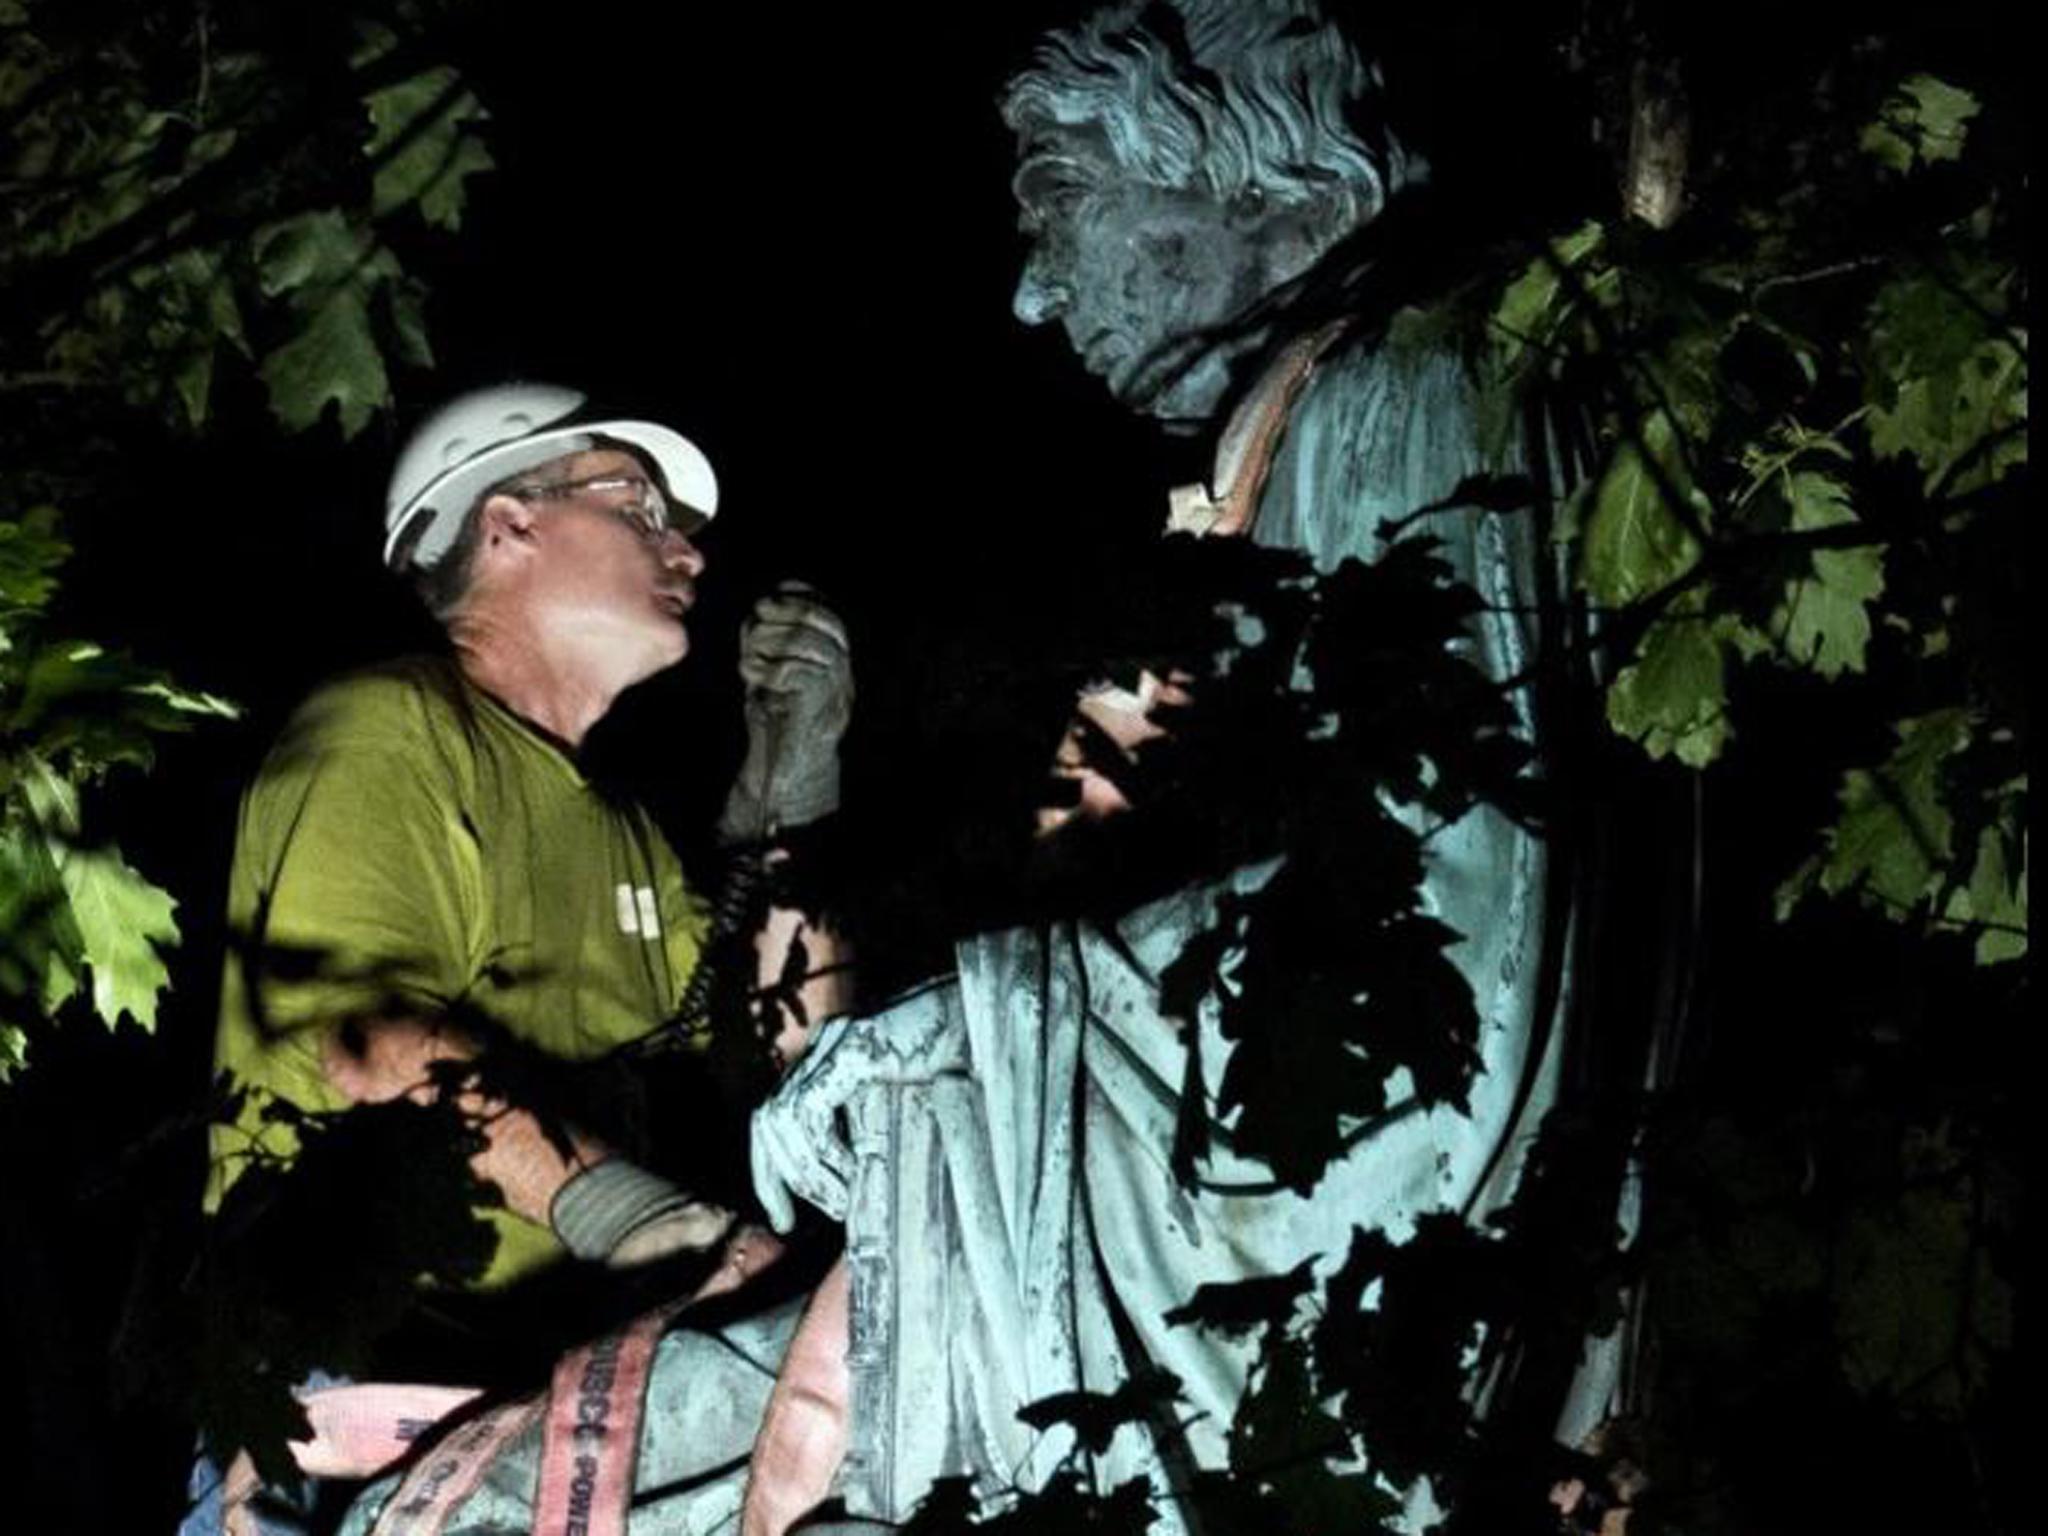 A worker dismantles the statue of Supreme Court Justice Roger B. Taney outside the Maryland State House in Annapolis